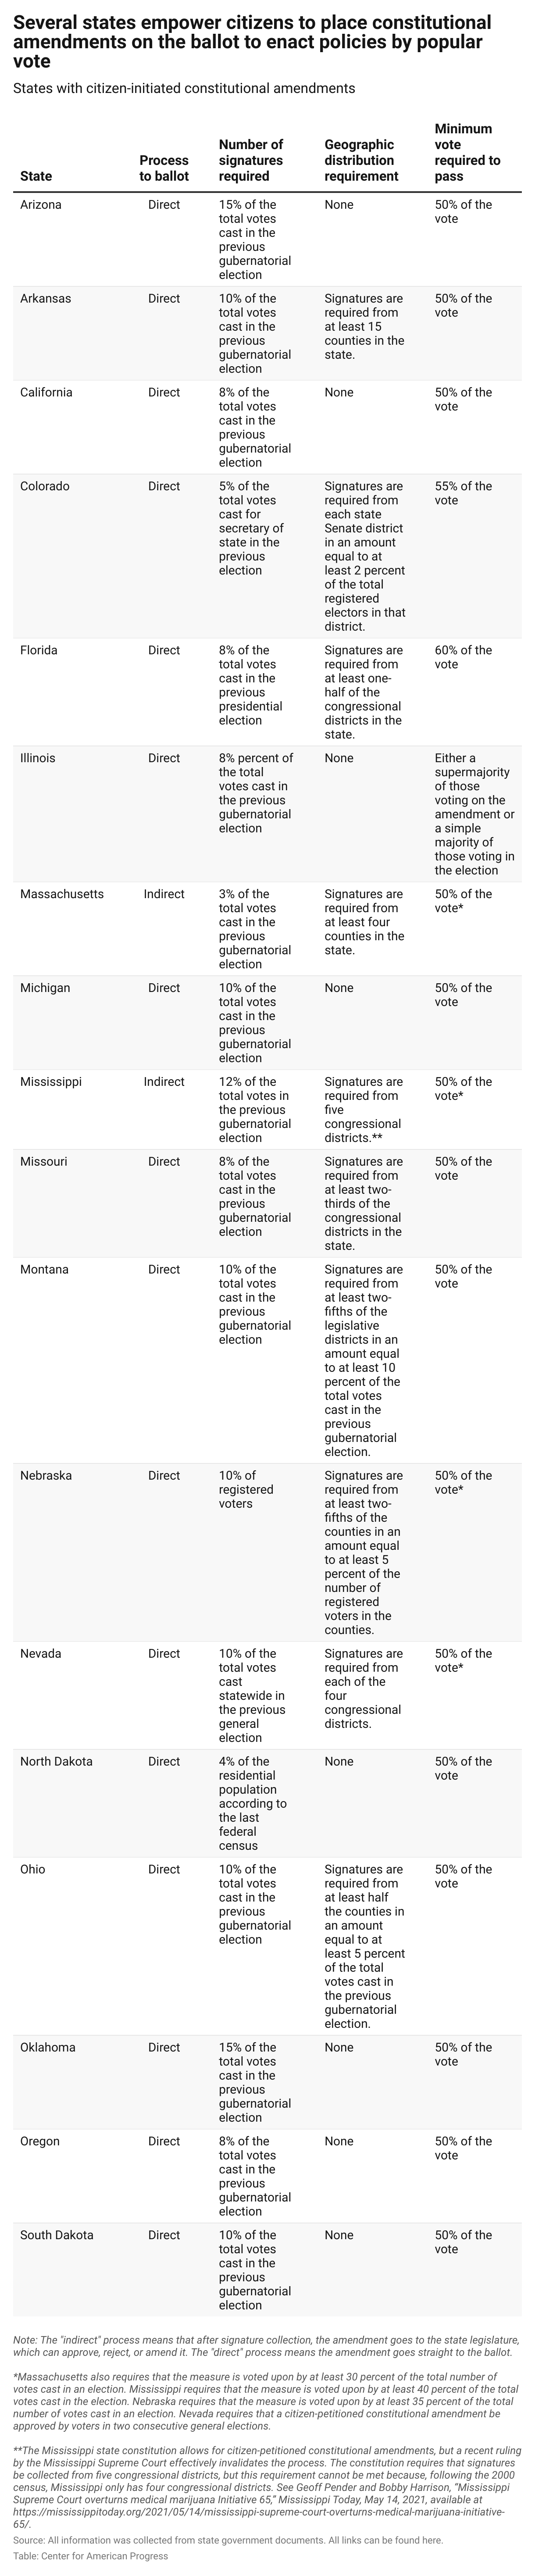 Table showing the states that allow for citizen-initiated constitutional amendments and each state's process for these ballot measures.